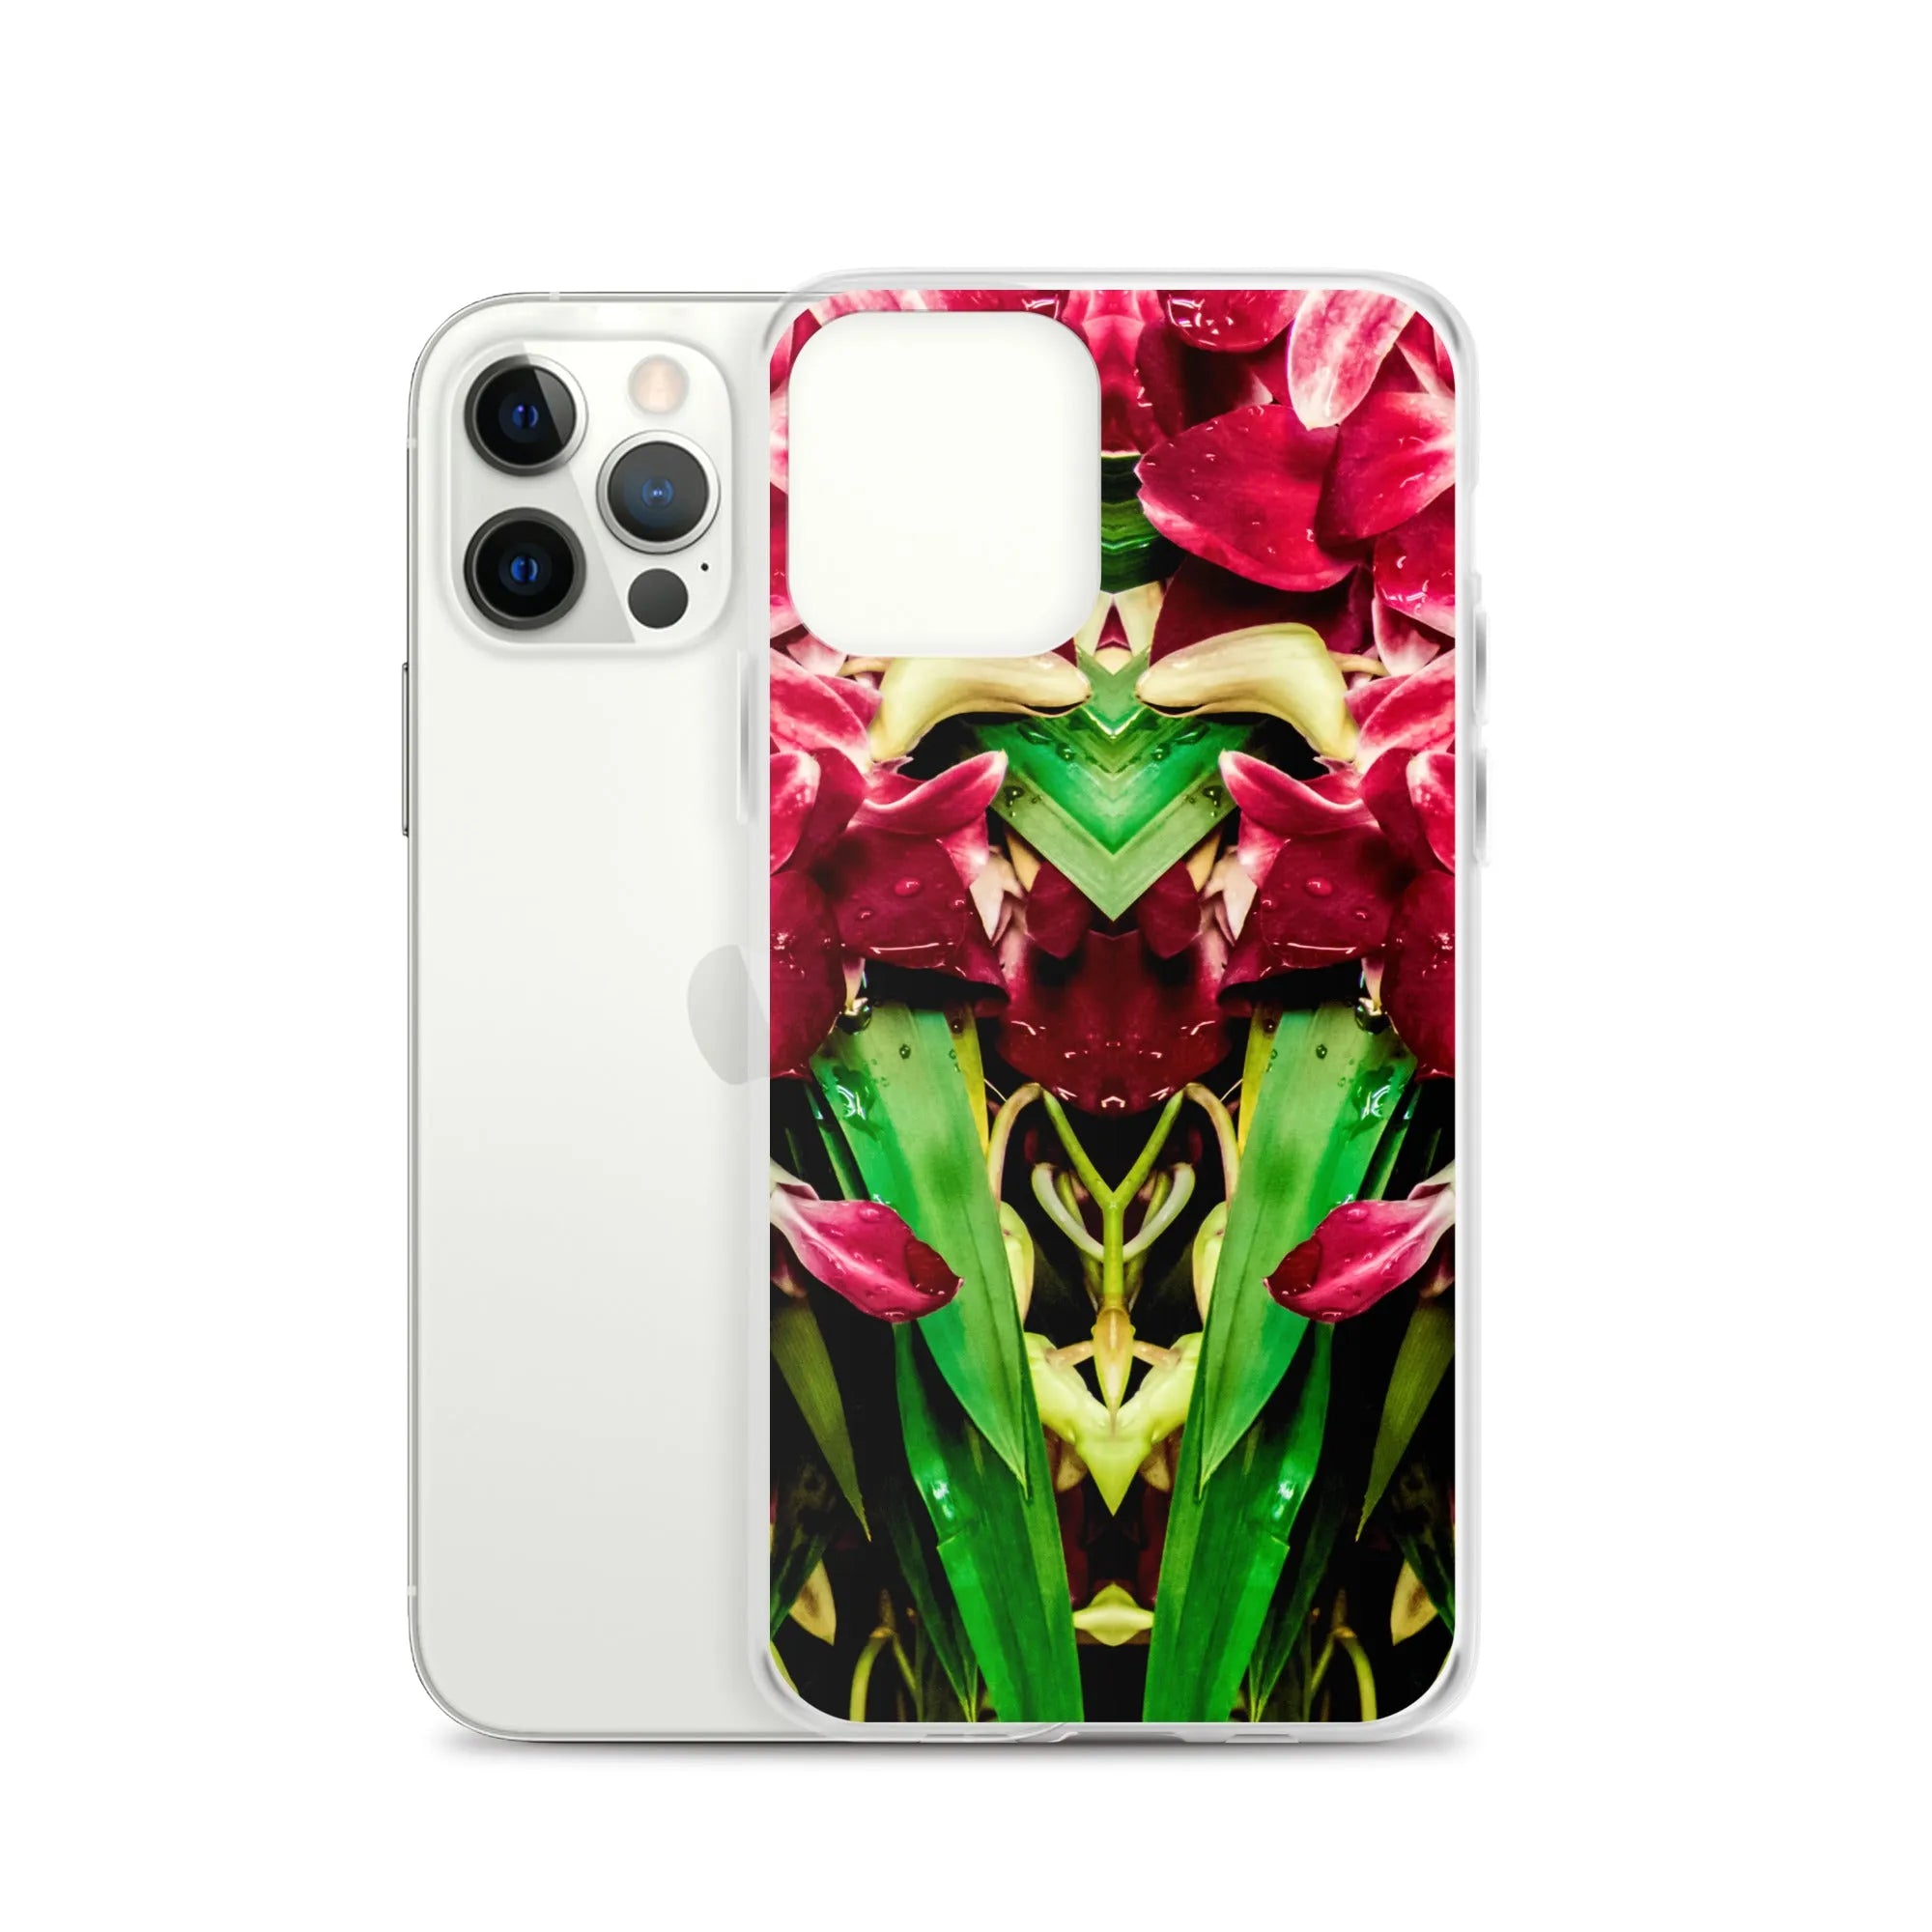 Ruby Reds² Floral Iphone Case - Iphone 12 Pro - Mobile Phone Cases - Aesthetic Art